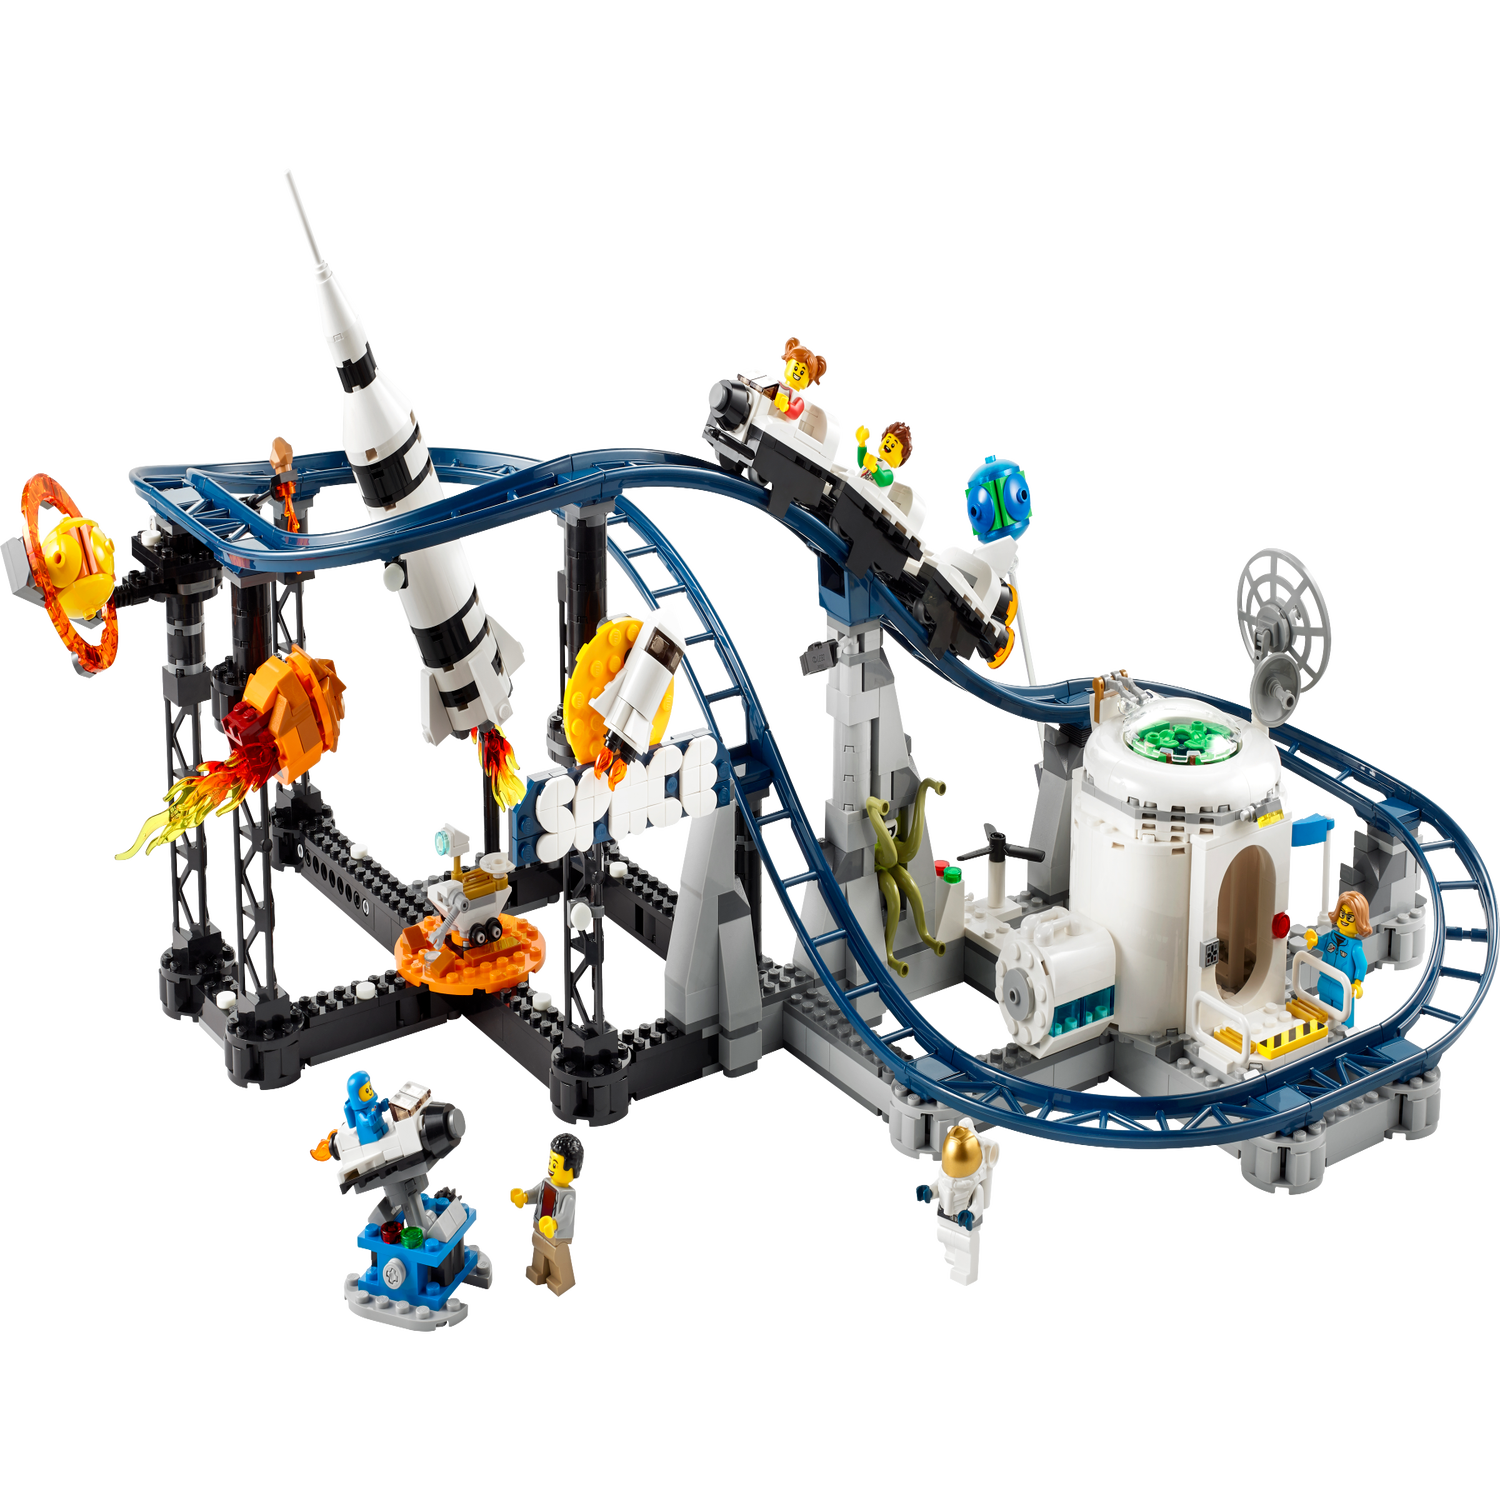 Space Roller Coaster 31142 | Creator 3-in-1 online at the Official LEGO® Shop US